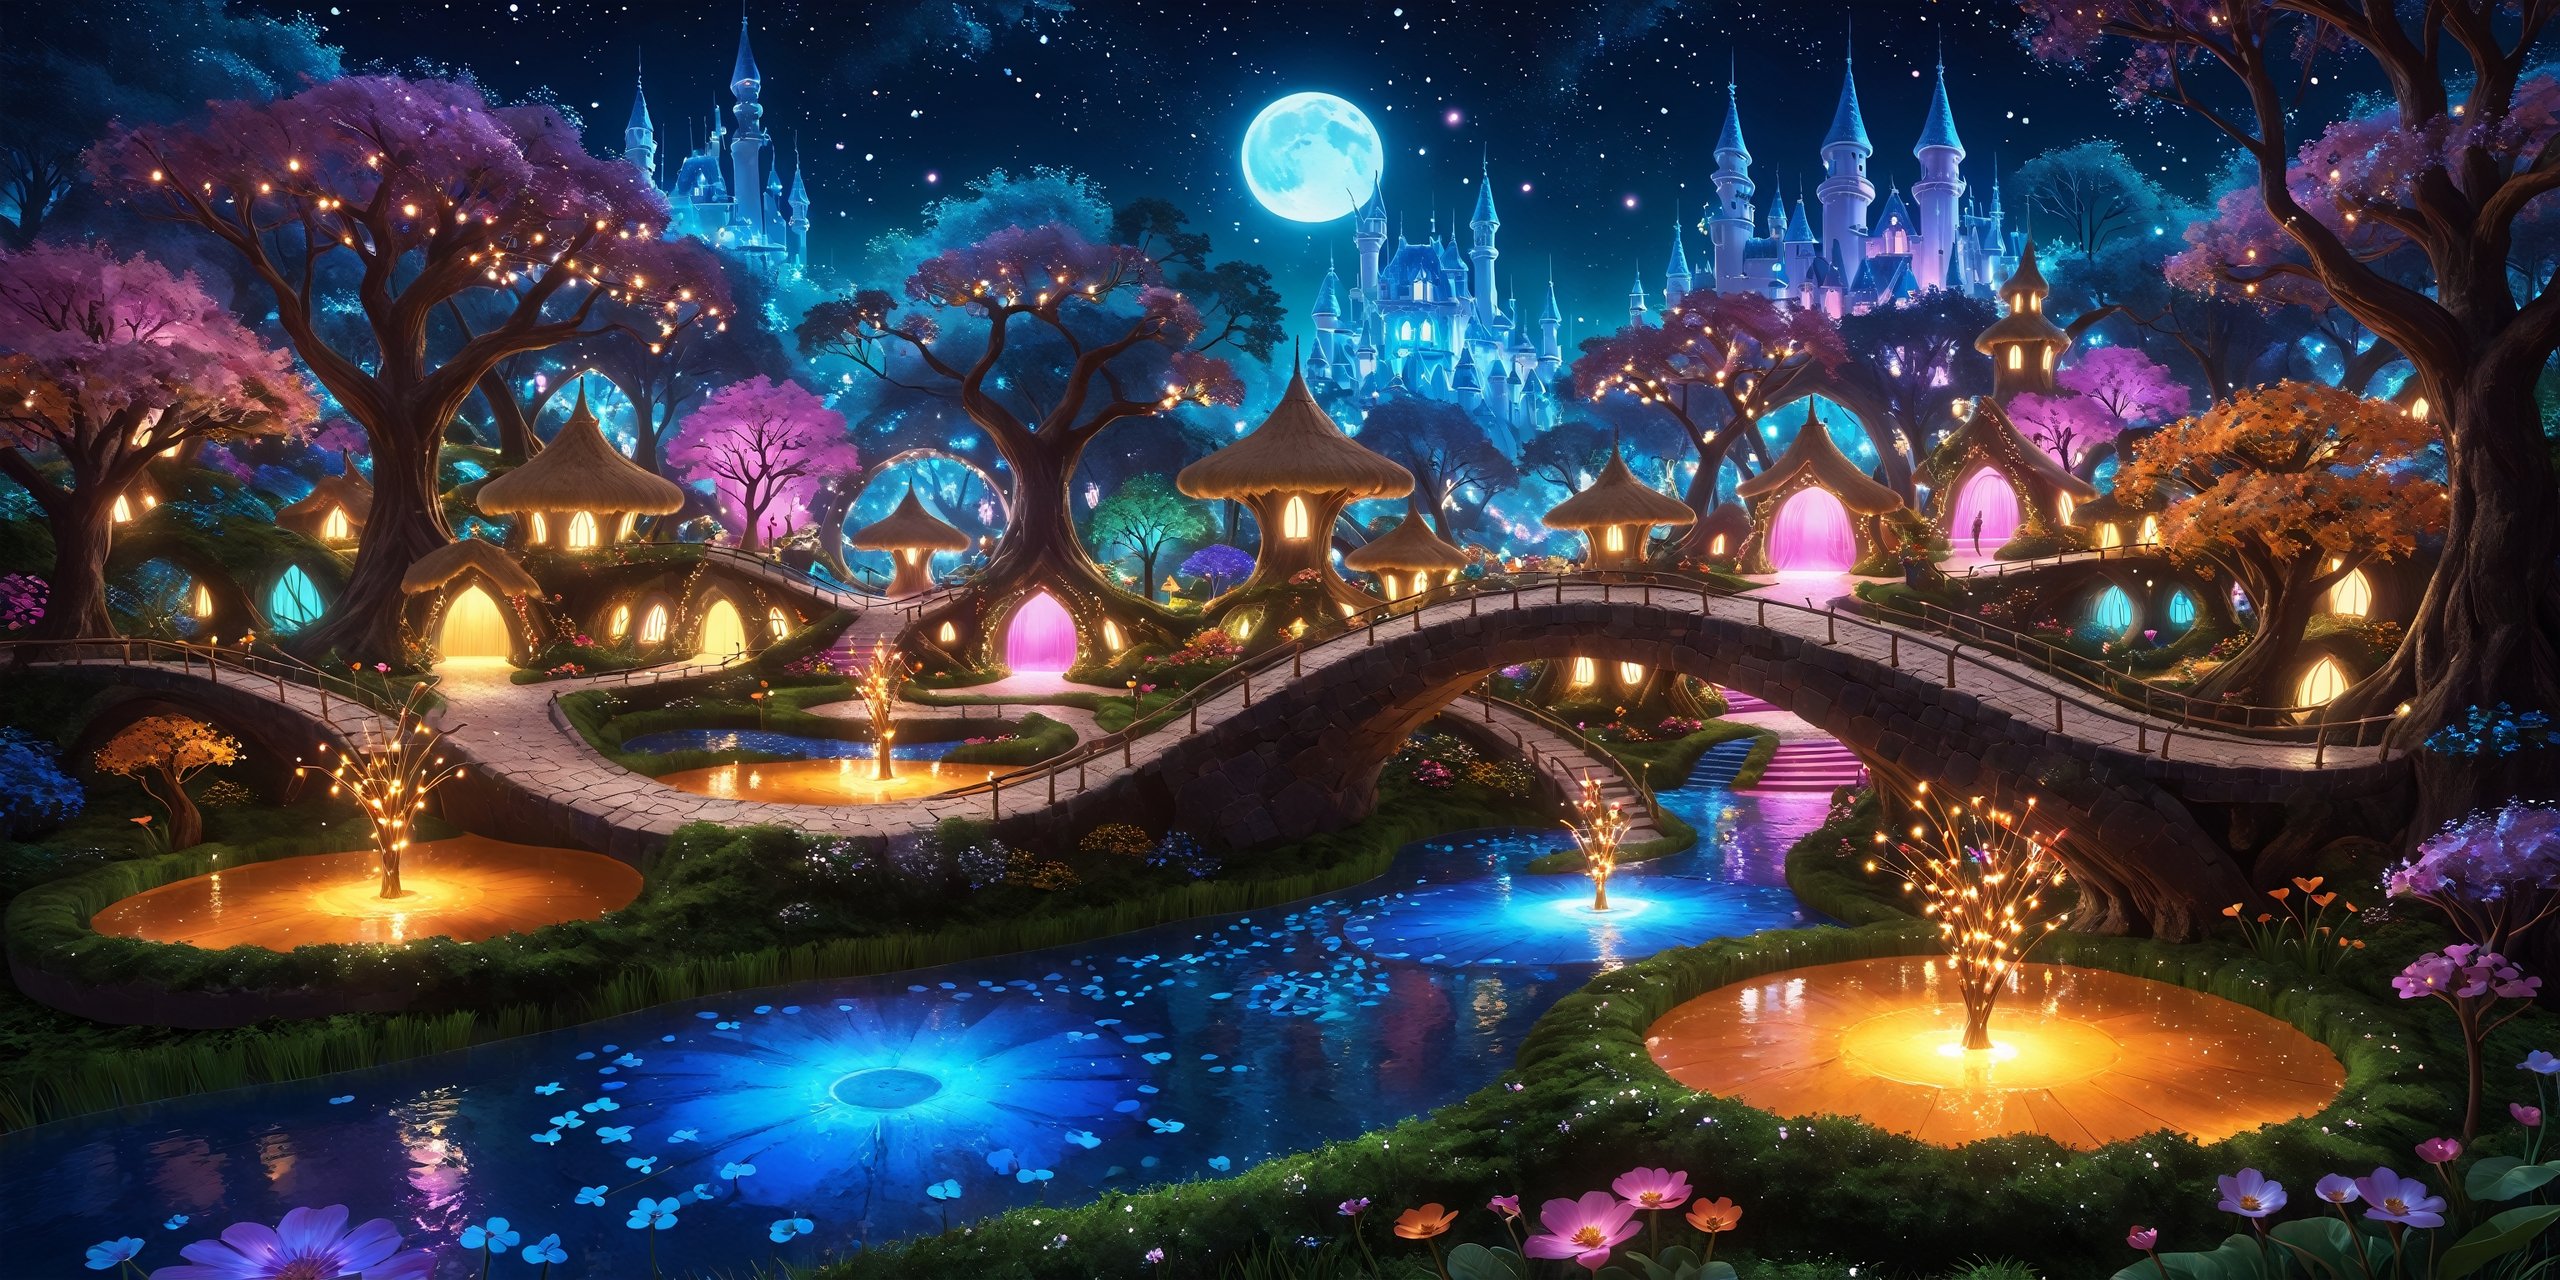 (best quality, masterpiece:1.3), high fantasy, c0raline_style,  (stop motion), alien architecture, colorful, (cinematic), stylish, focus, dreamy, extremely detailed and dynamic, (hyperrealistic, photoreal:1.1), cg unity wallpaper, fairy village, shimmer, glowing, high contrast, enchanted forest, disney, uhdr, full angle view, bloom, twisted tree, dynamic lighting, volumetric, deep depth of field:1.3), bokeh, expressive, intricate design, pond, moon bridge, atmosphere, sugar, glitter, floating particles, dark, field, outdoors, nature, sky, grass, more detail XL,madgod,Movie Still,l0dbg,sweetscape